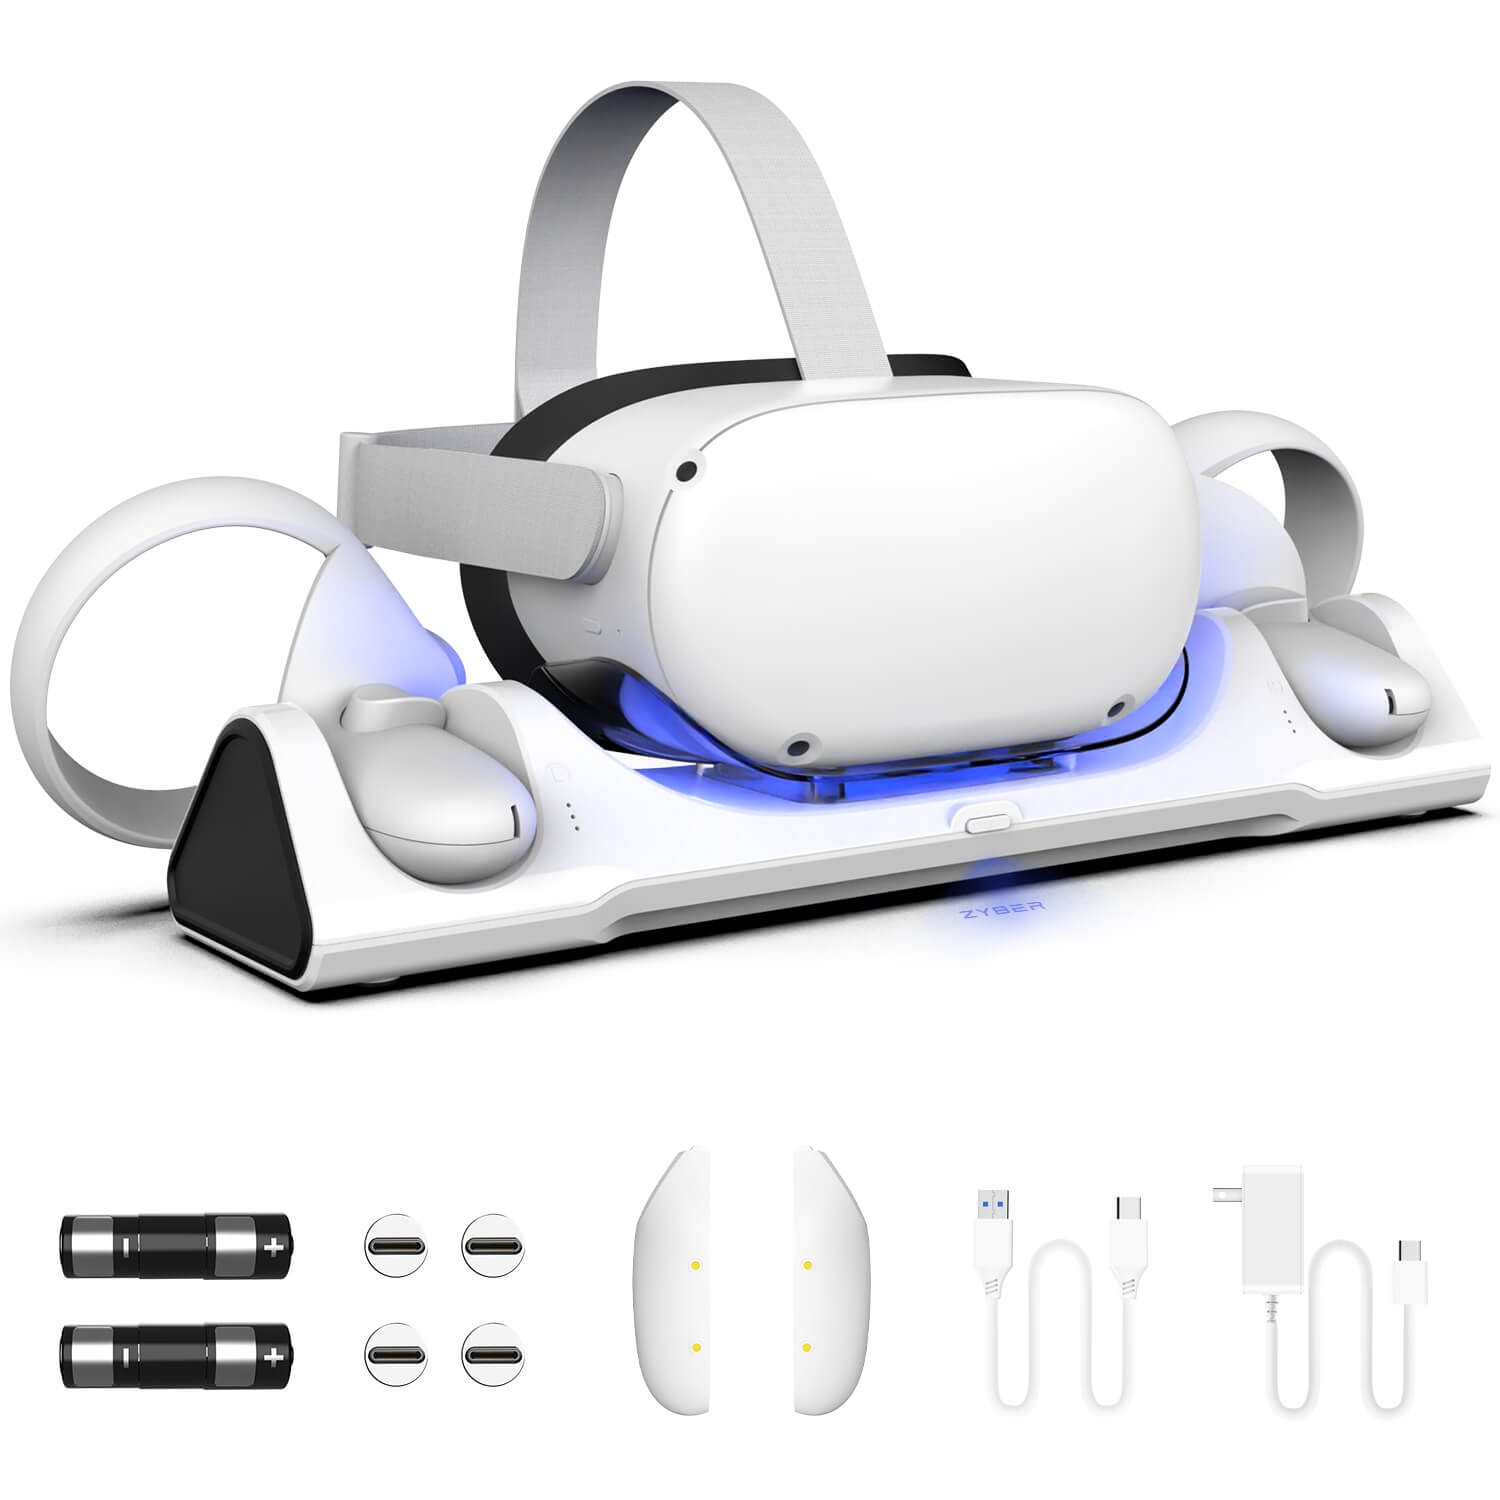 ZyberVR Charging Dock for Quest 2 Headset and Controllers